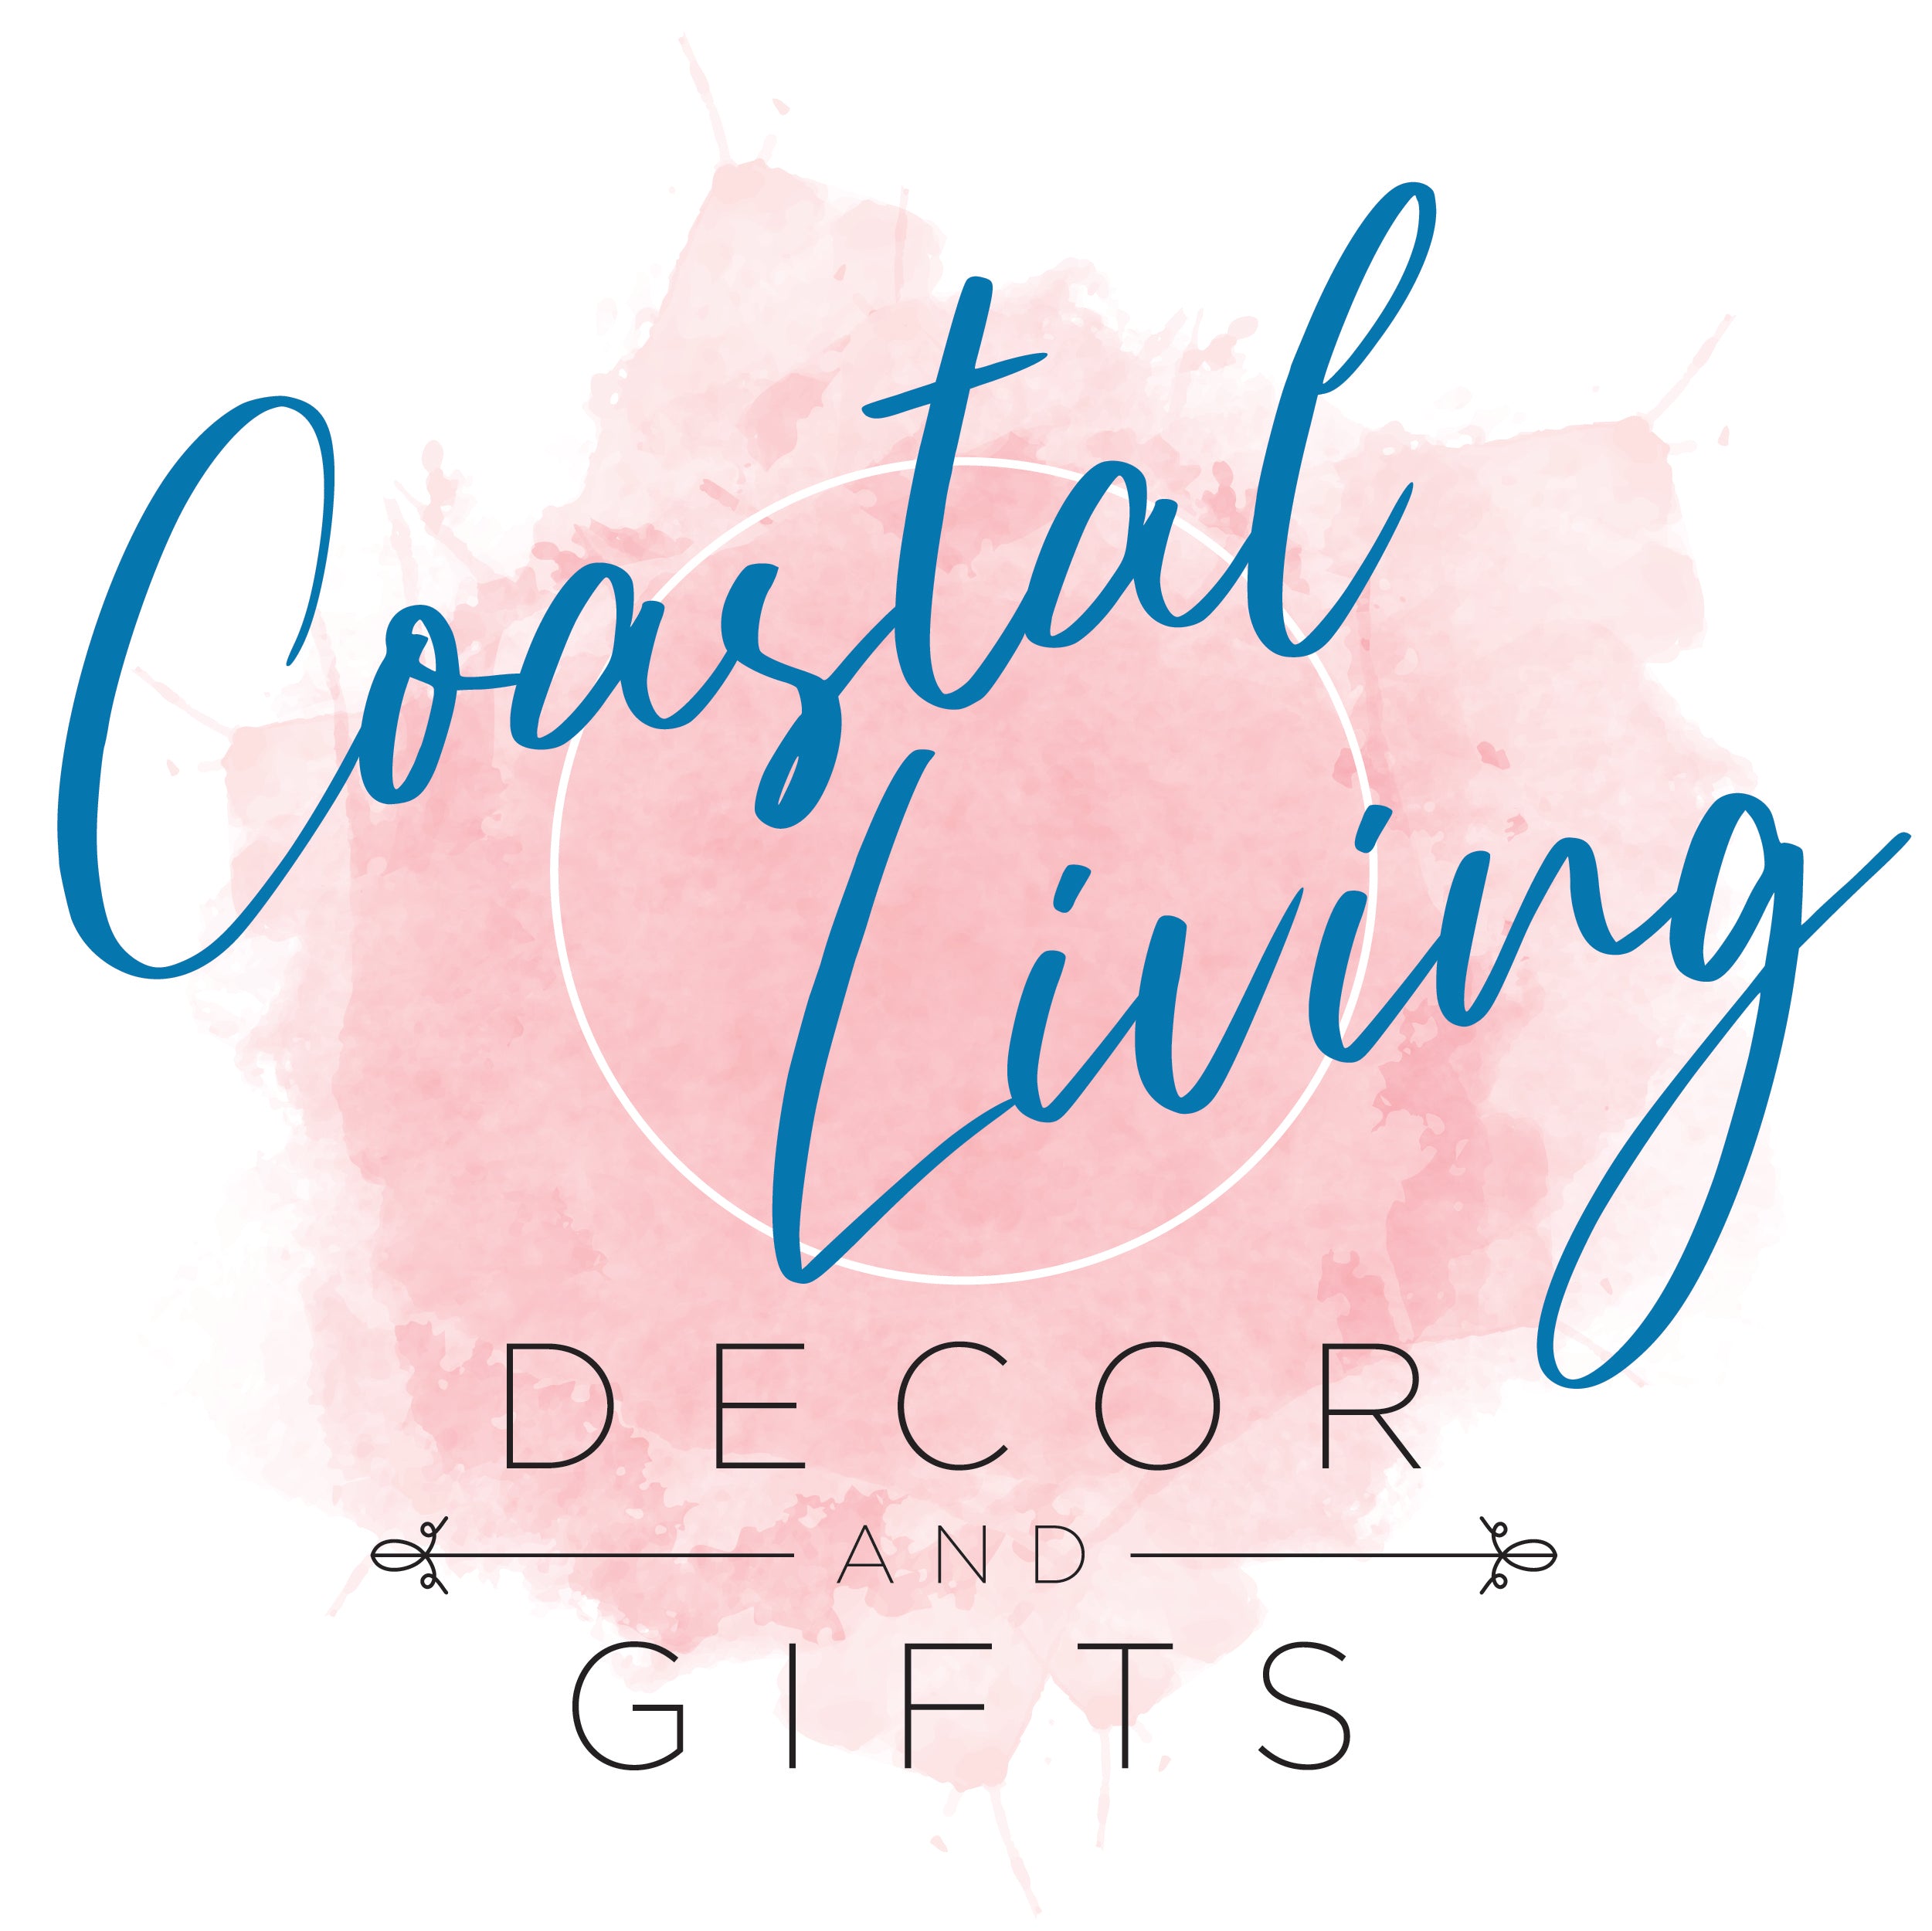 Coastal Living Decor and Gifts